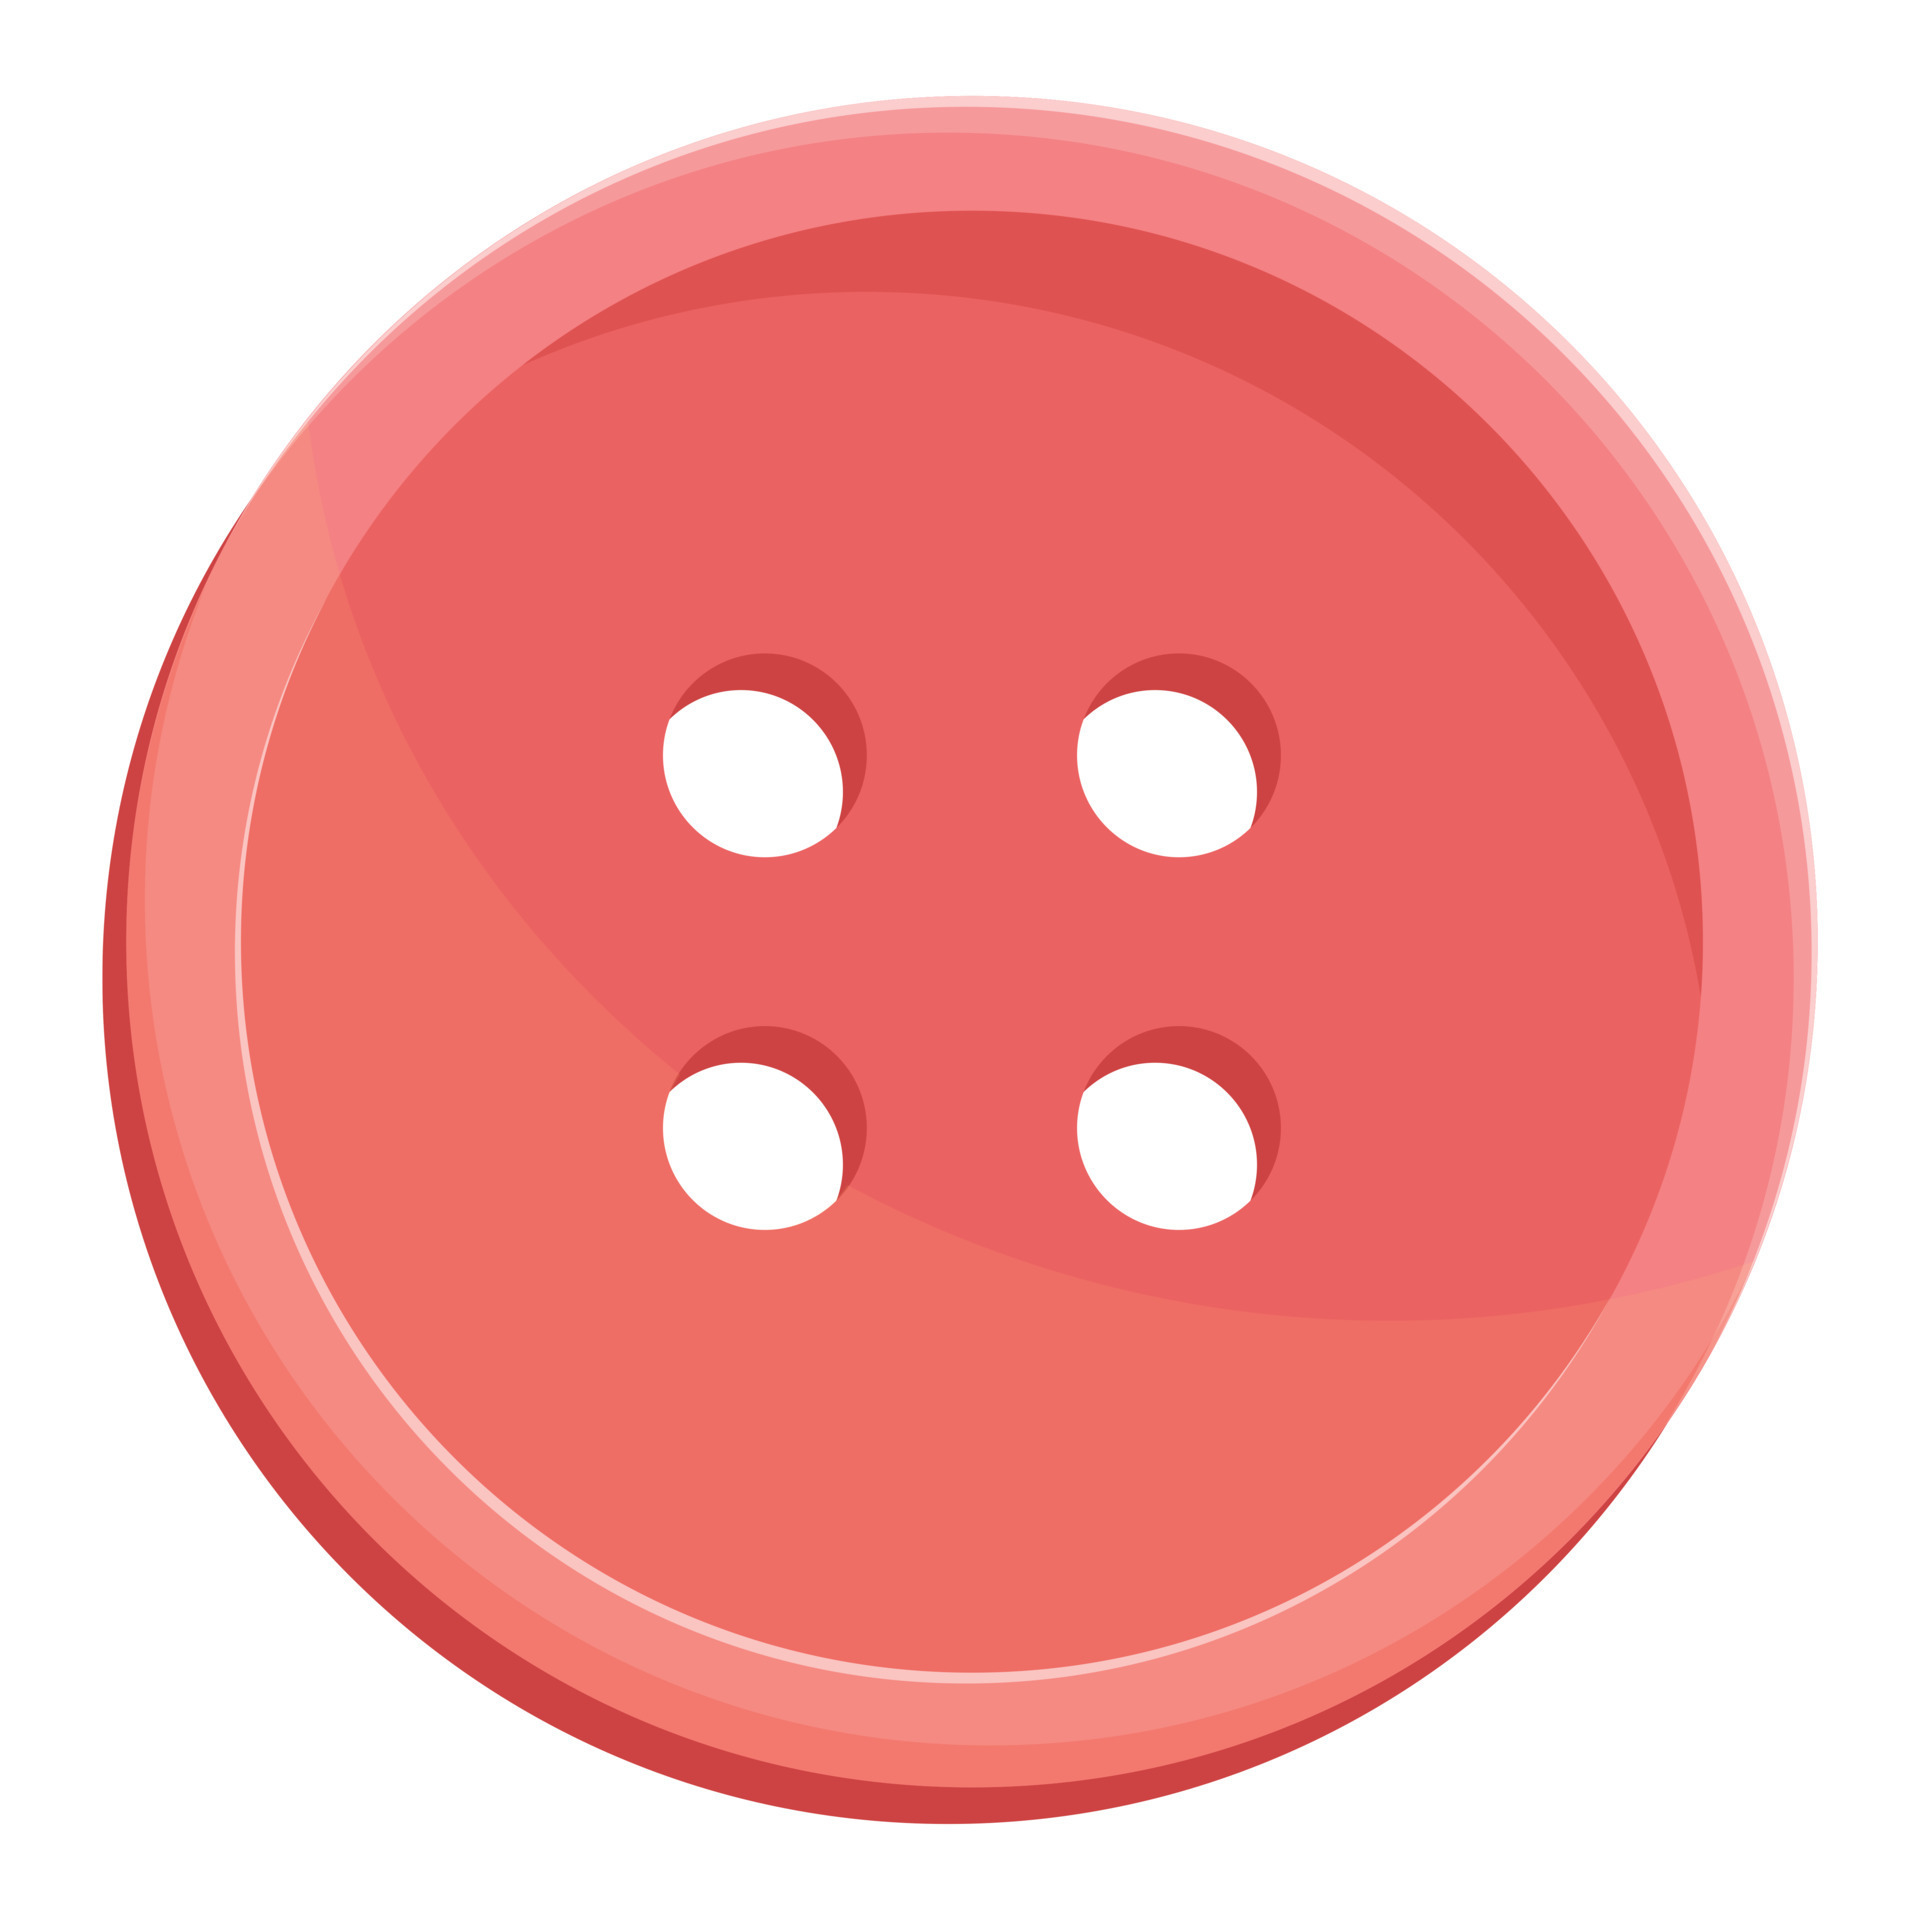 No red button icon cartoon style Royalty Free Vector Image